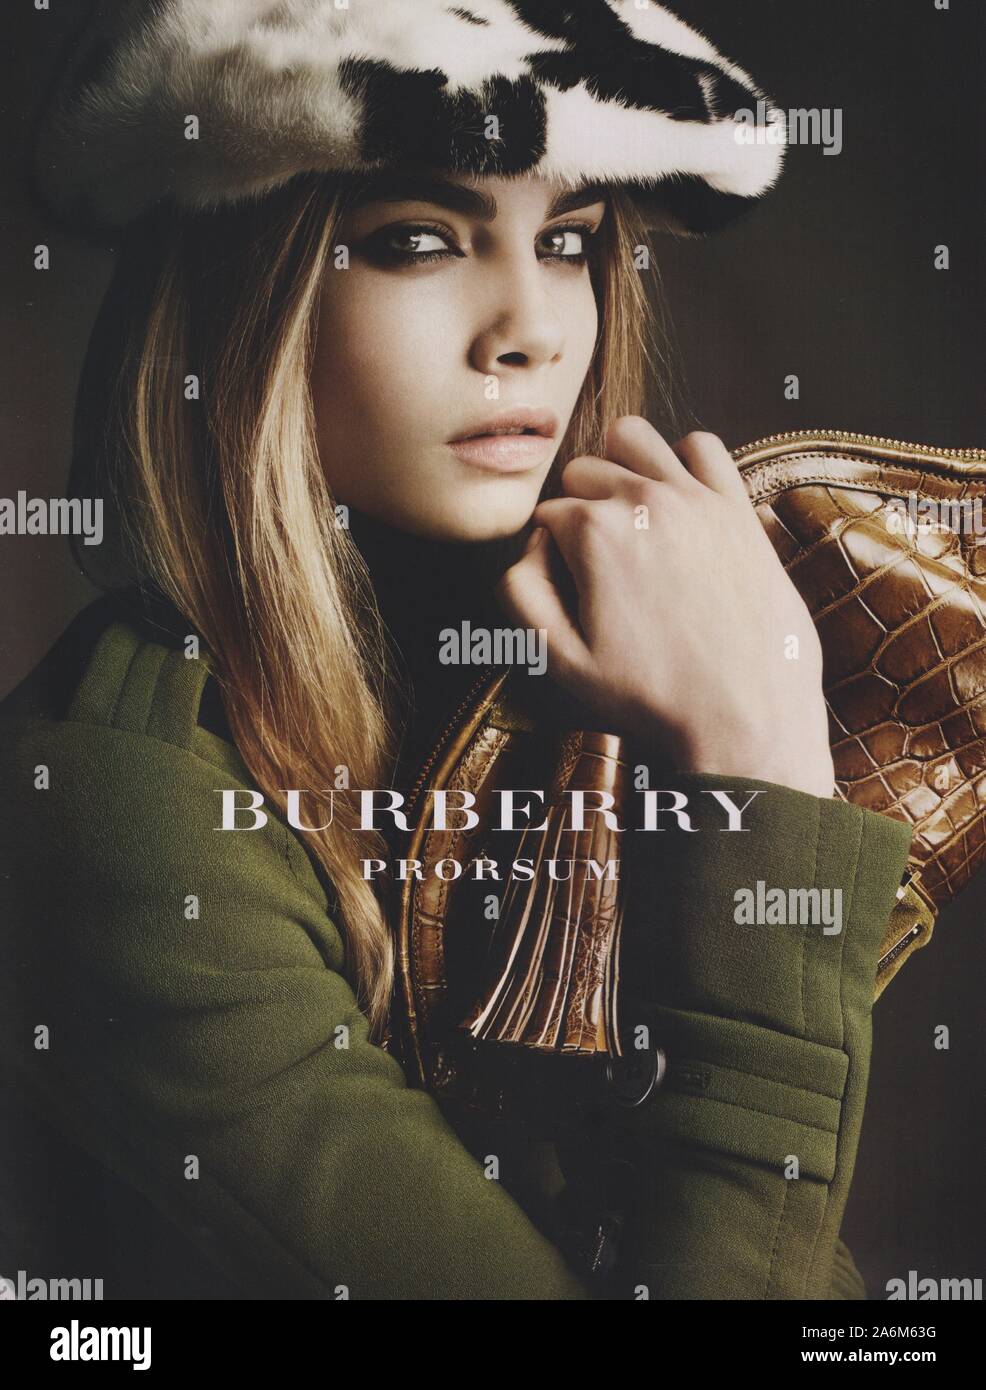 poster advertising Burberry fashion house with Cara Delevingne in paper  magazine from 2011 year, advertisement, creative Burberry advert from 2010s  Stock Photo - Alamy